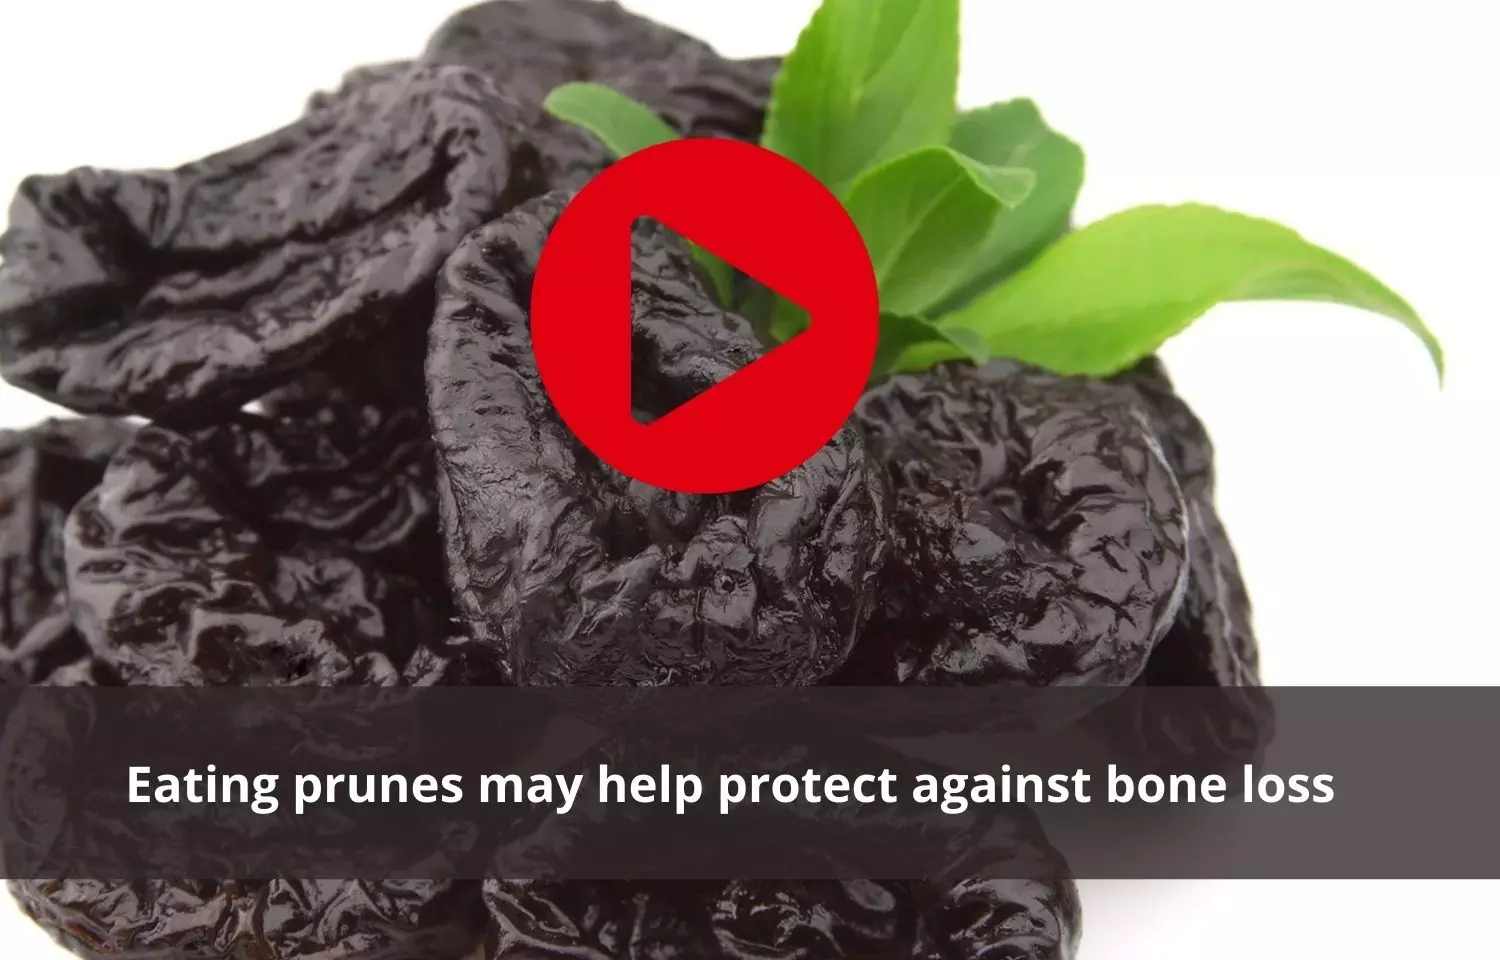 Consumption of prunes help protect against bone loss